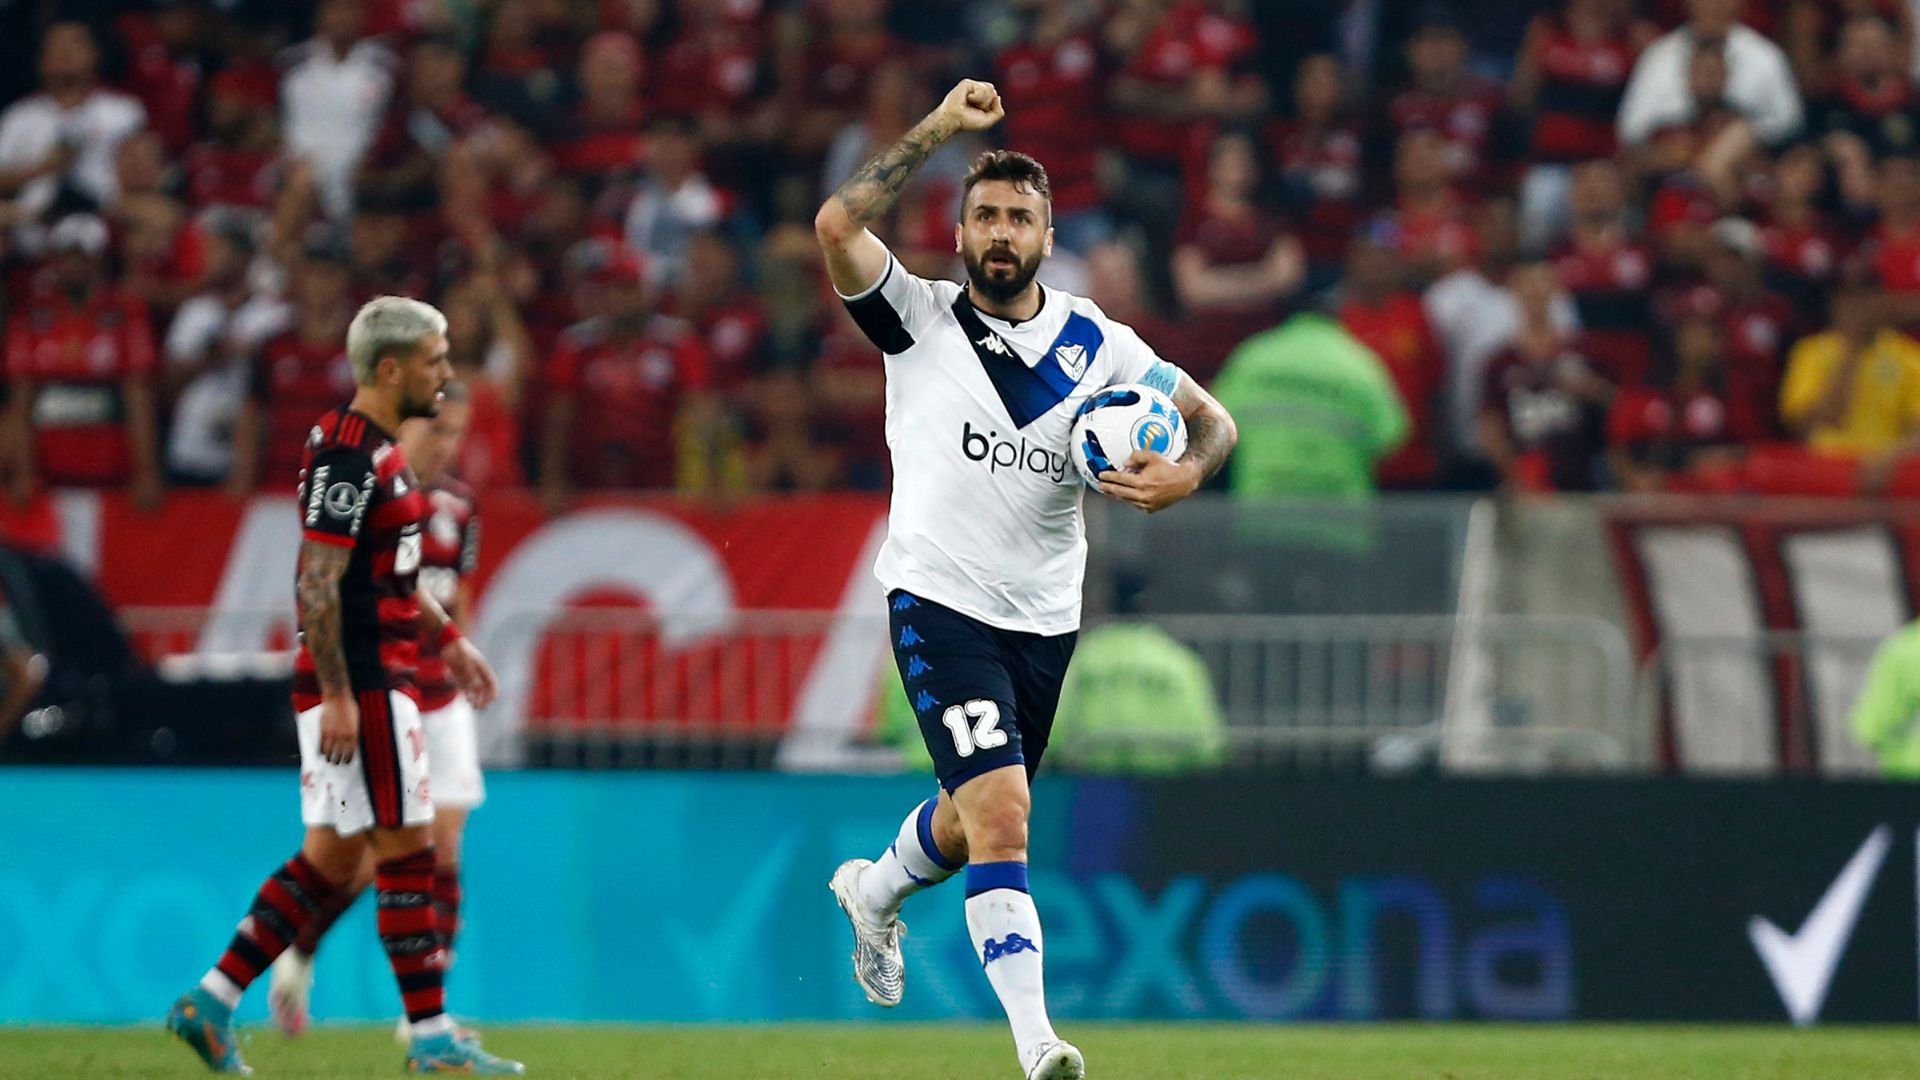 Pratto after scoring a goal against Flamengo, in 2022 (Credit: Getty Images)